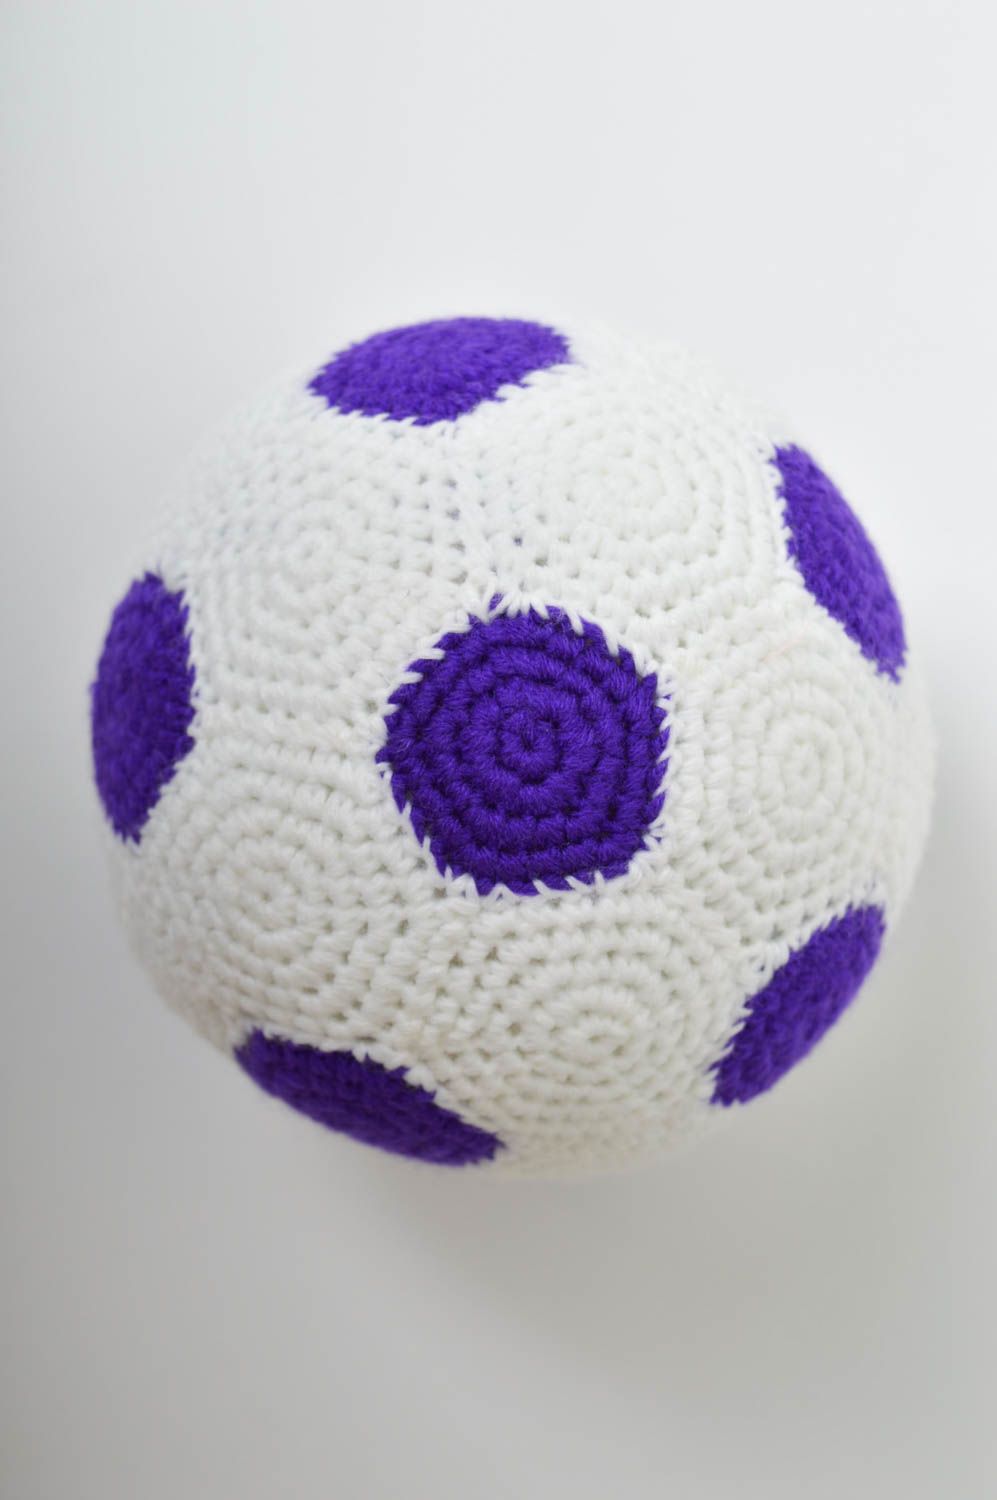 Handmade soft toy decorative crocheted toy white and purple crocheted ball photo 5